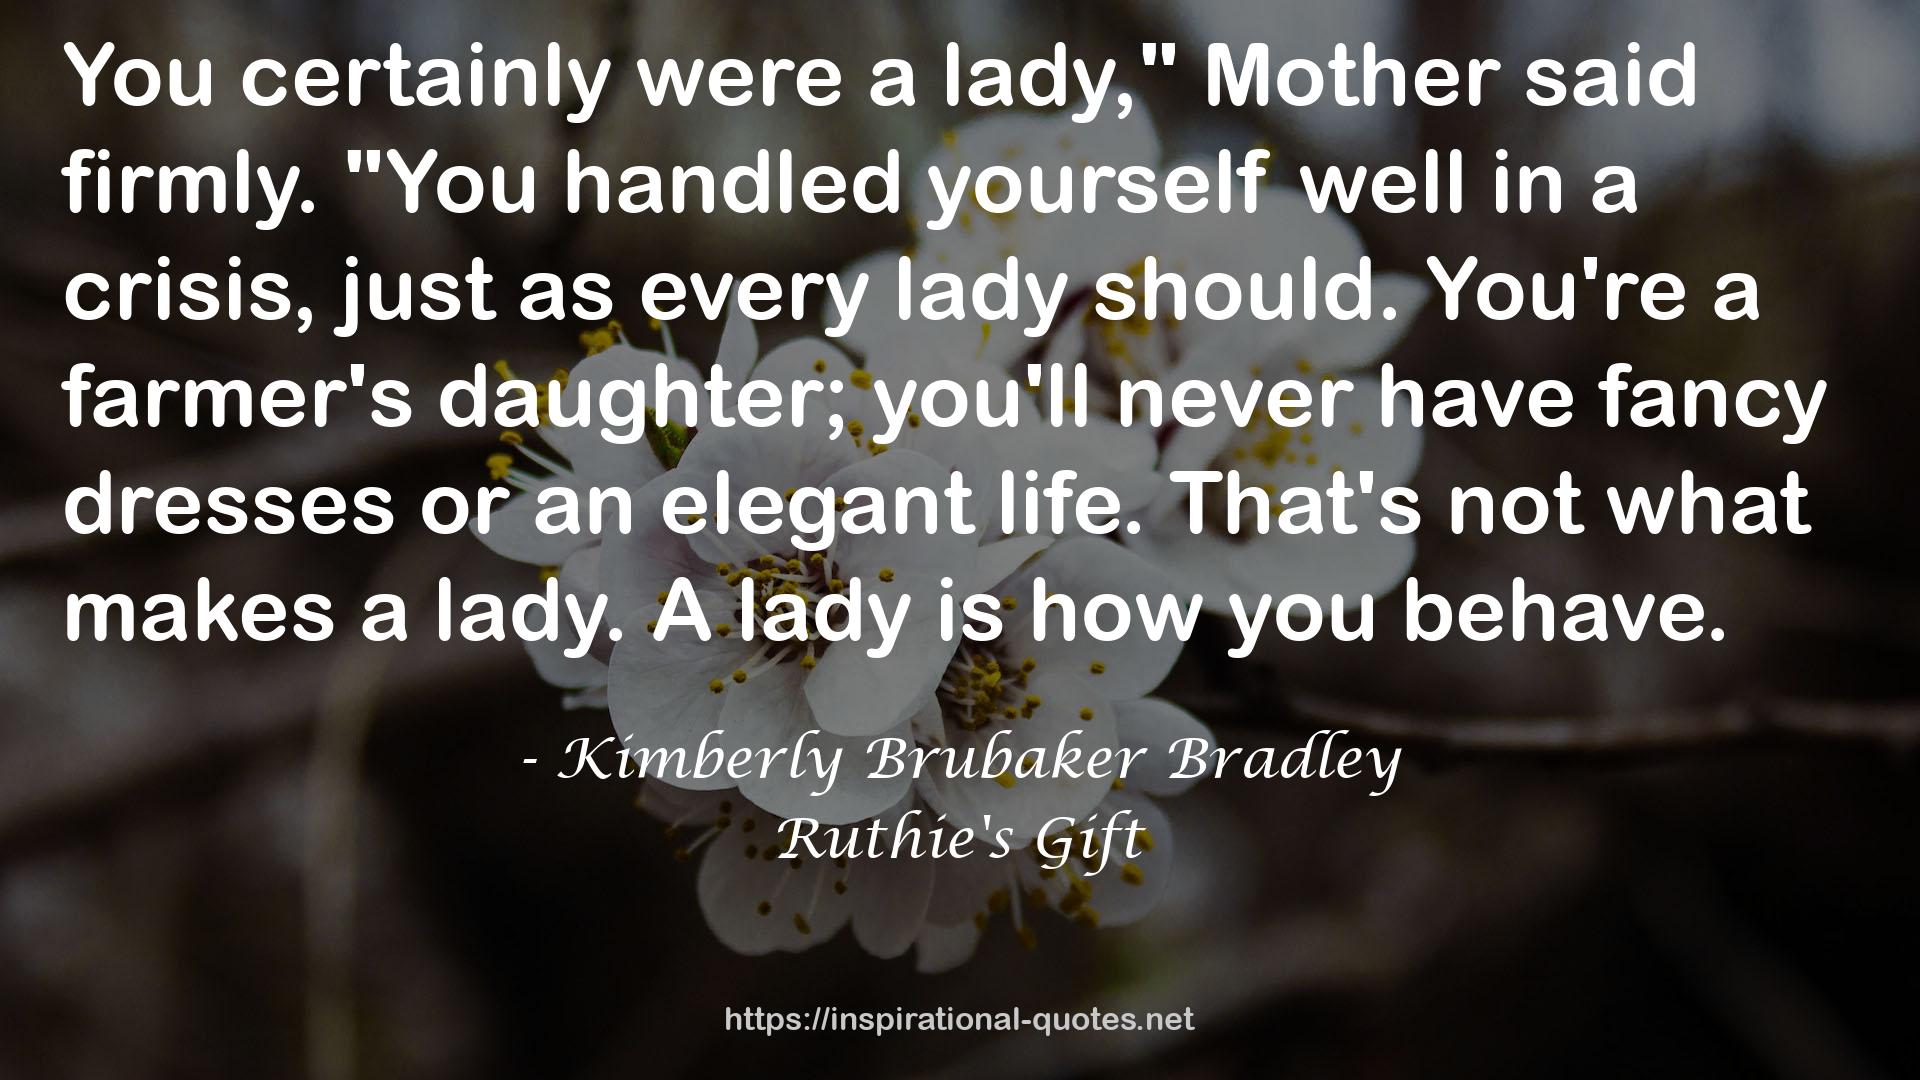 Ruthie's Gift QUOTES